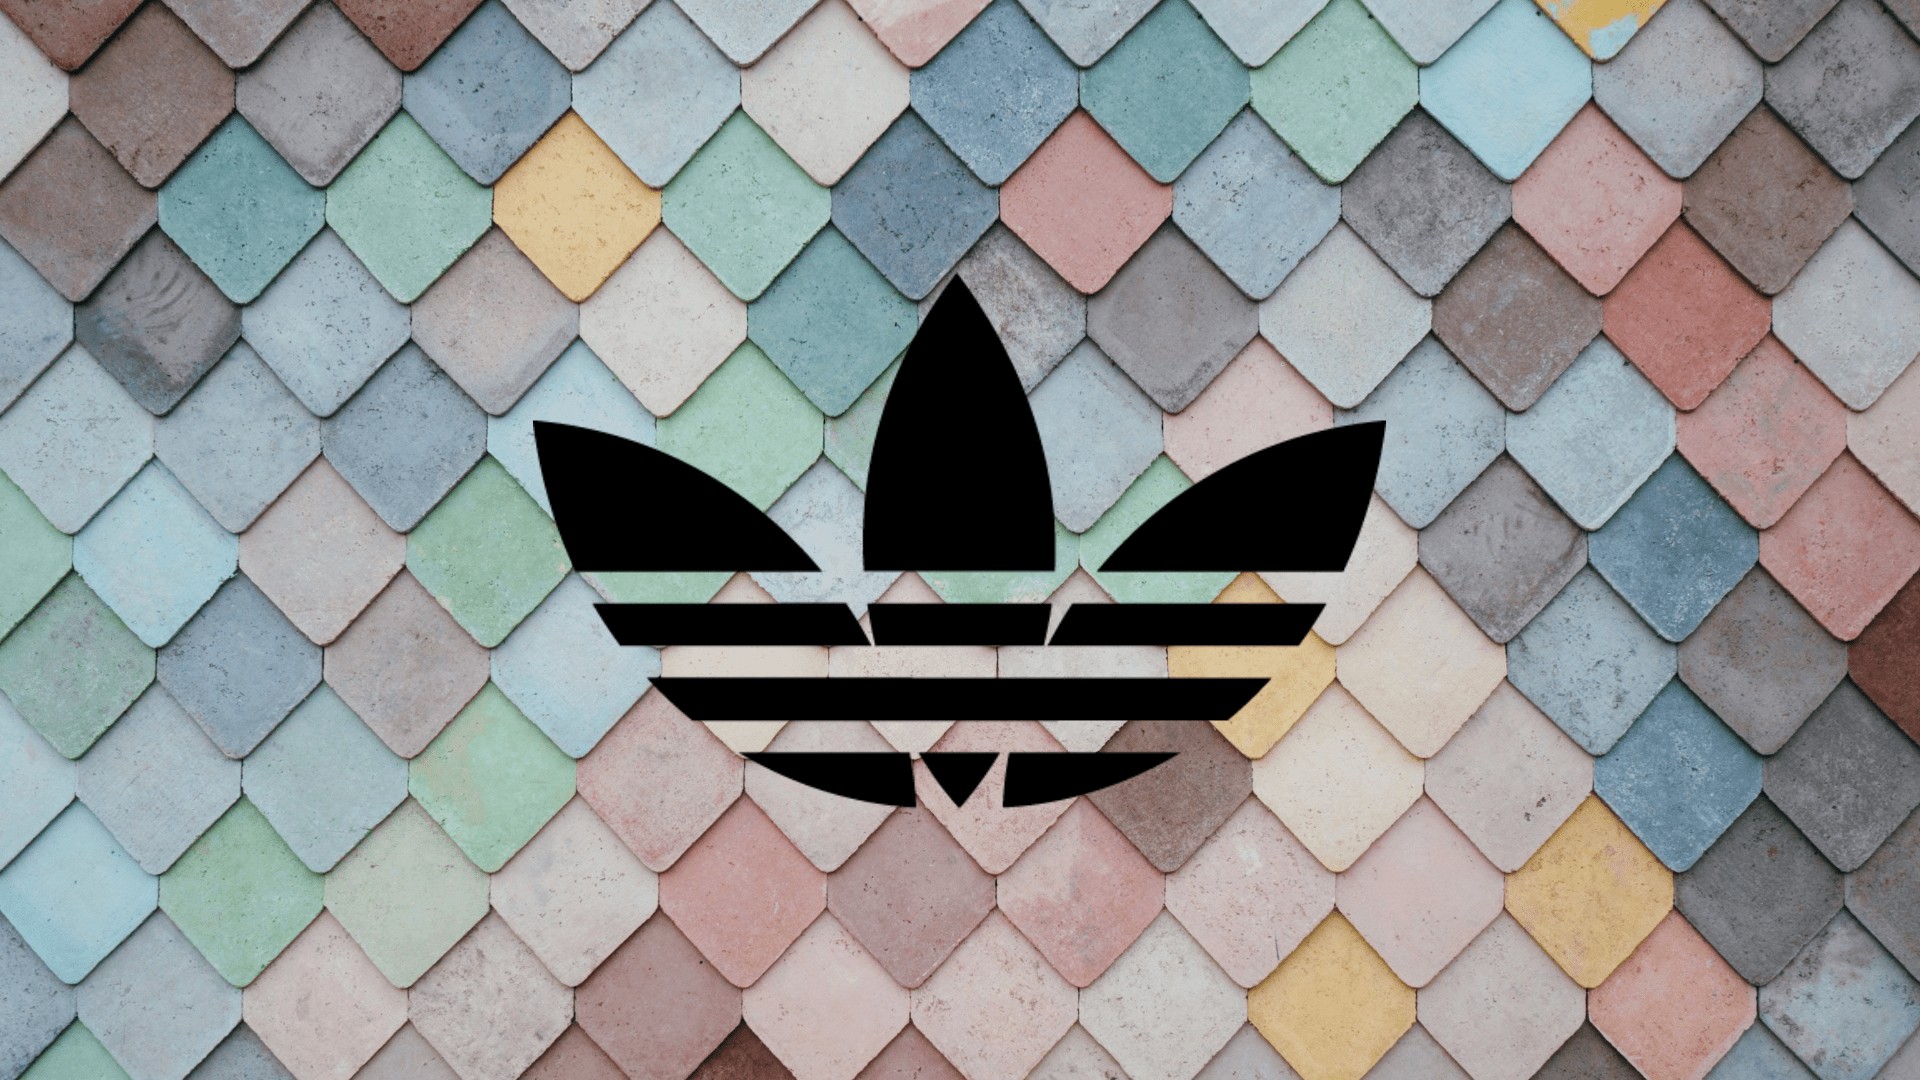 Adidas Desktop Wallpaper with high-resolution 1920x1080 pixel. You can use this wallpaper for your Windows and Mac OS computers as well as your Android and iPhone smartphones